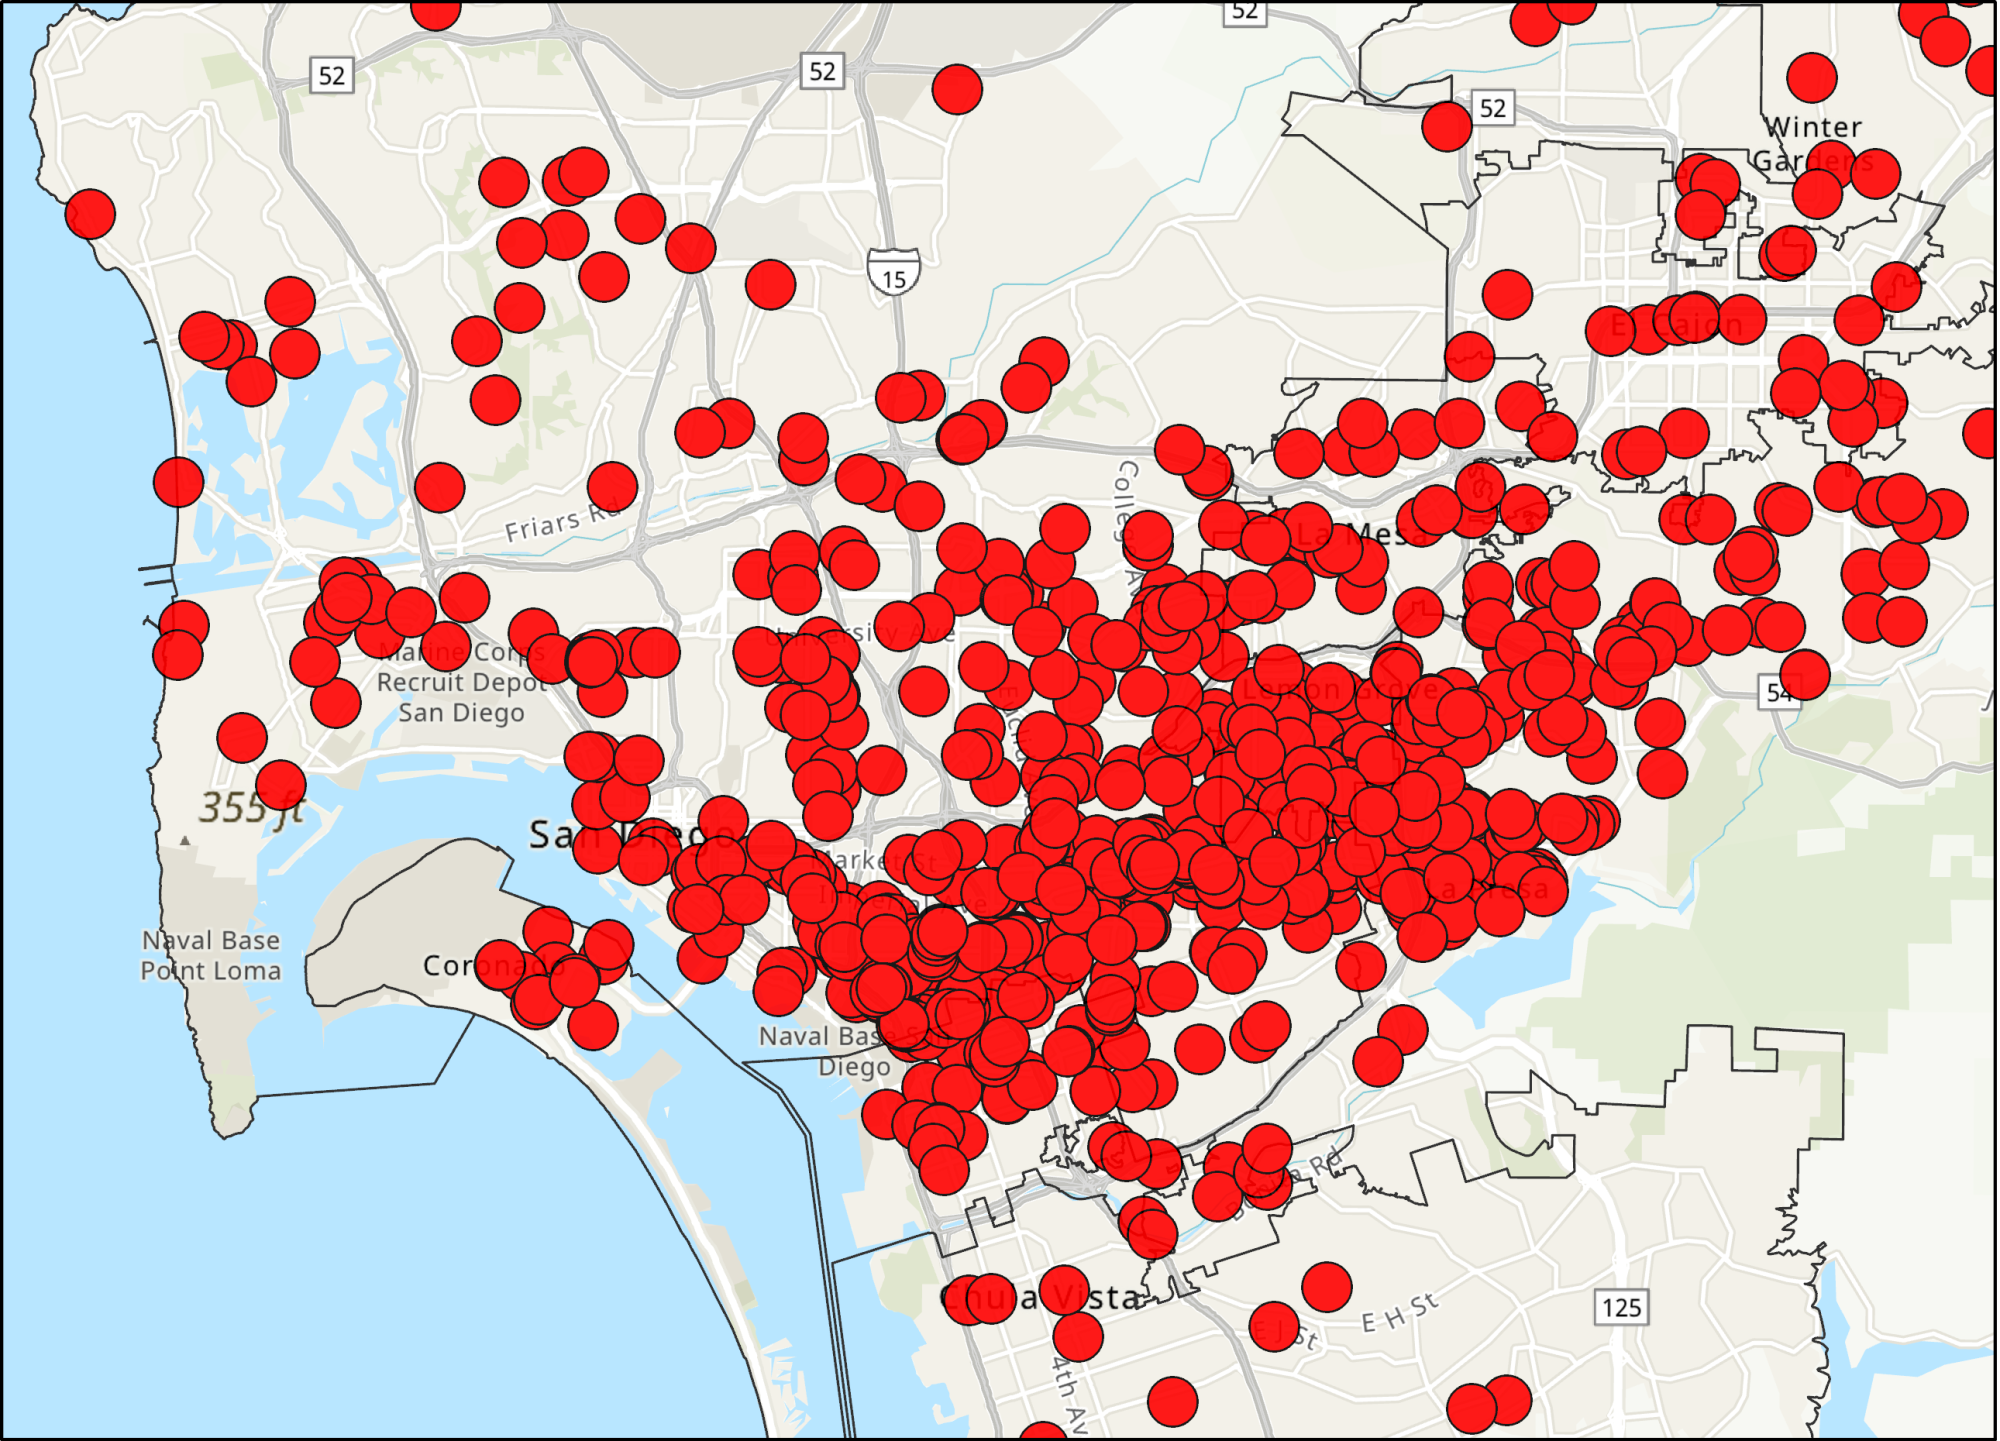 Each dot represents a location where damage from Monday’s storm 